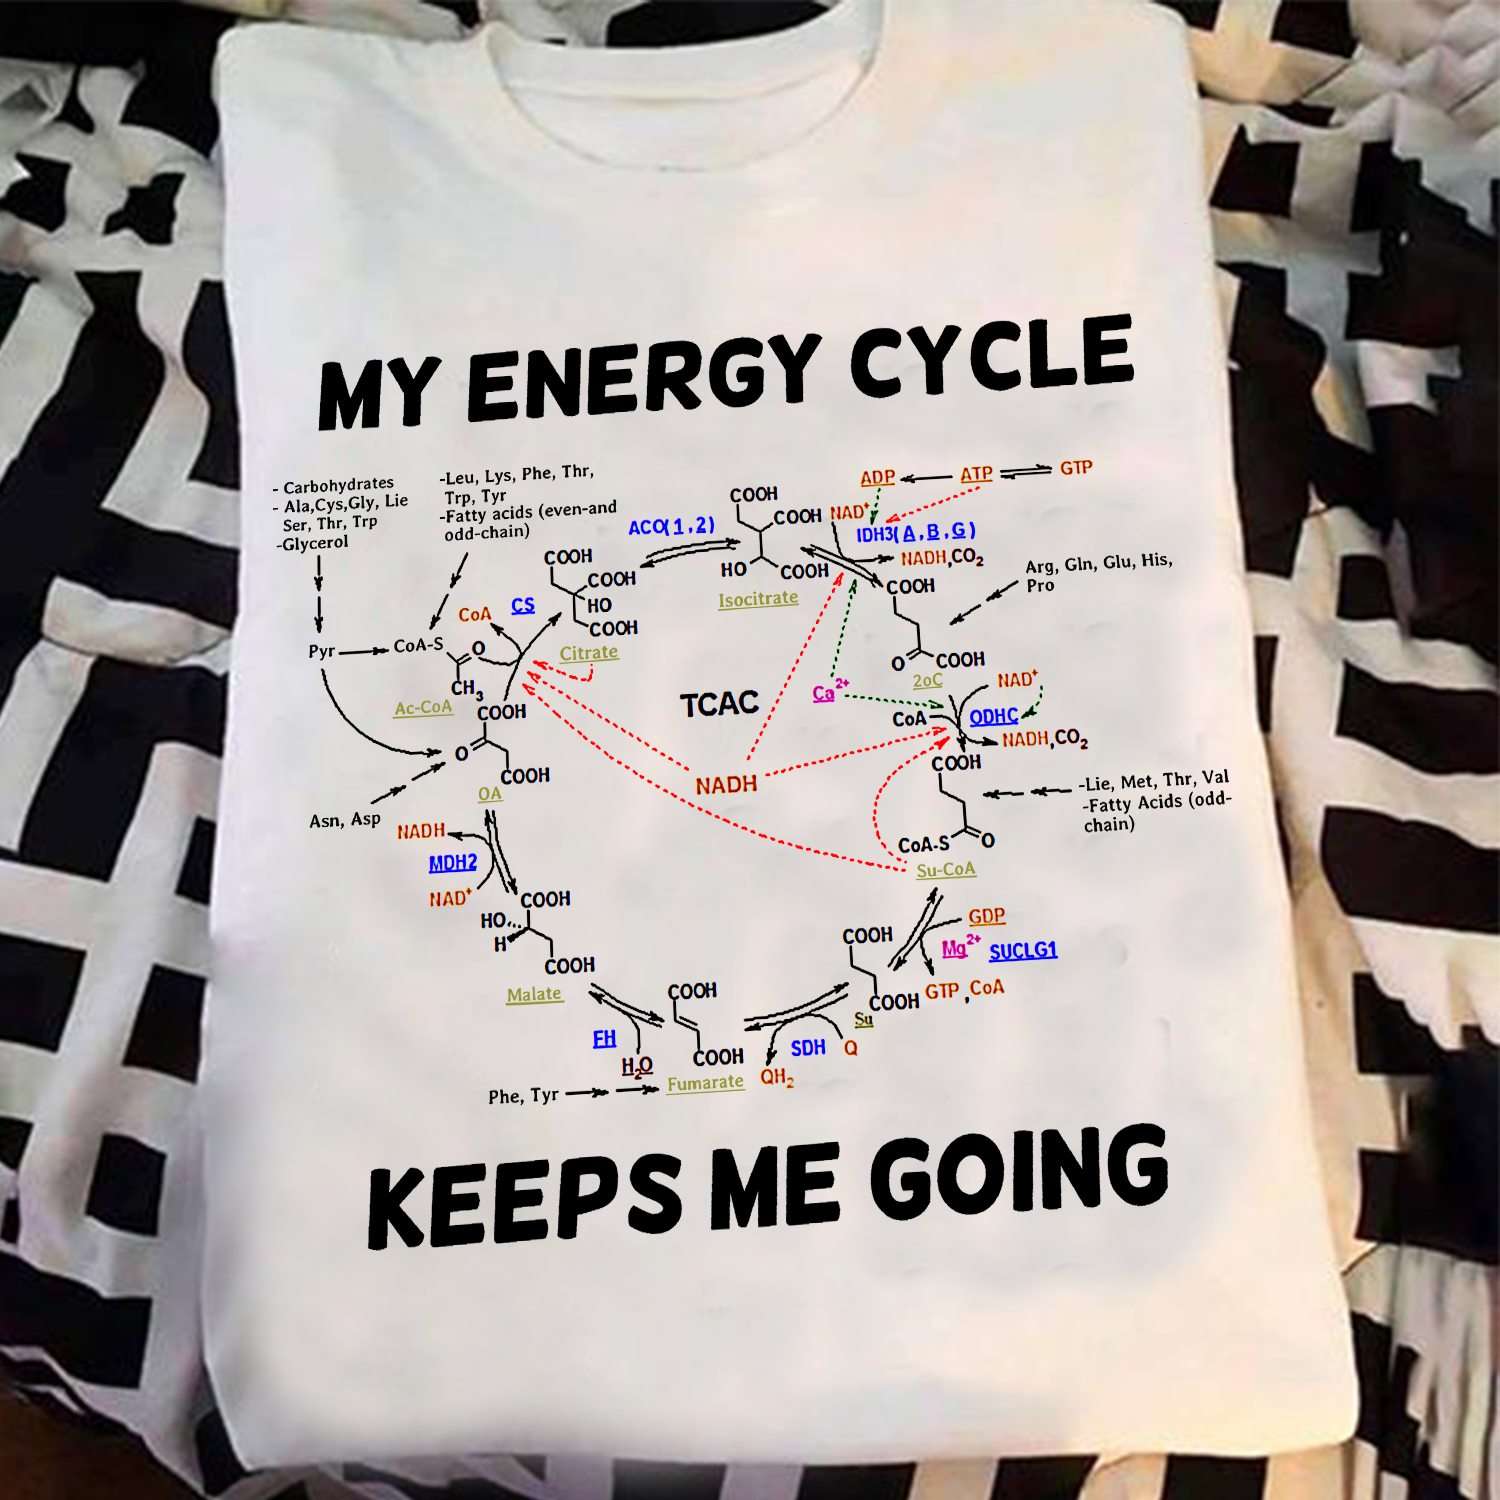 My energy cycle keeps me going - Biological knowledge